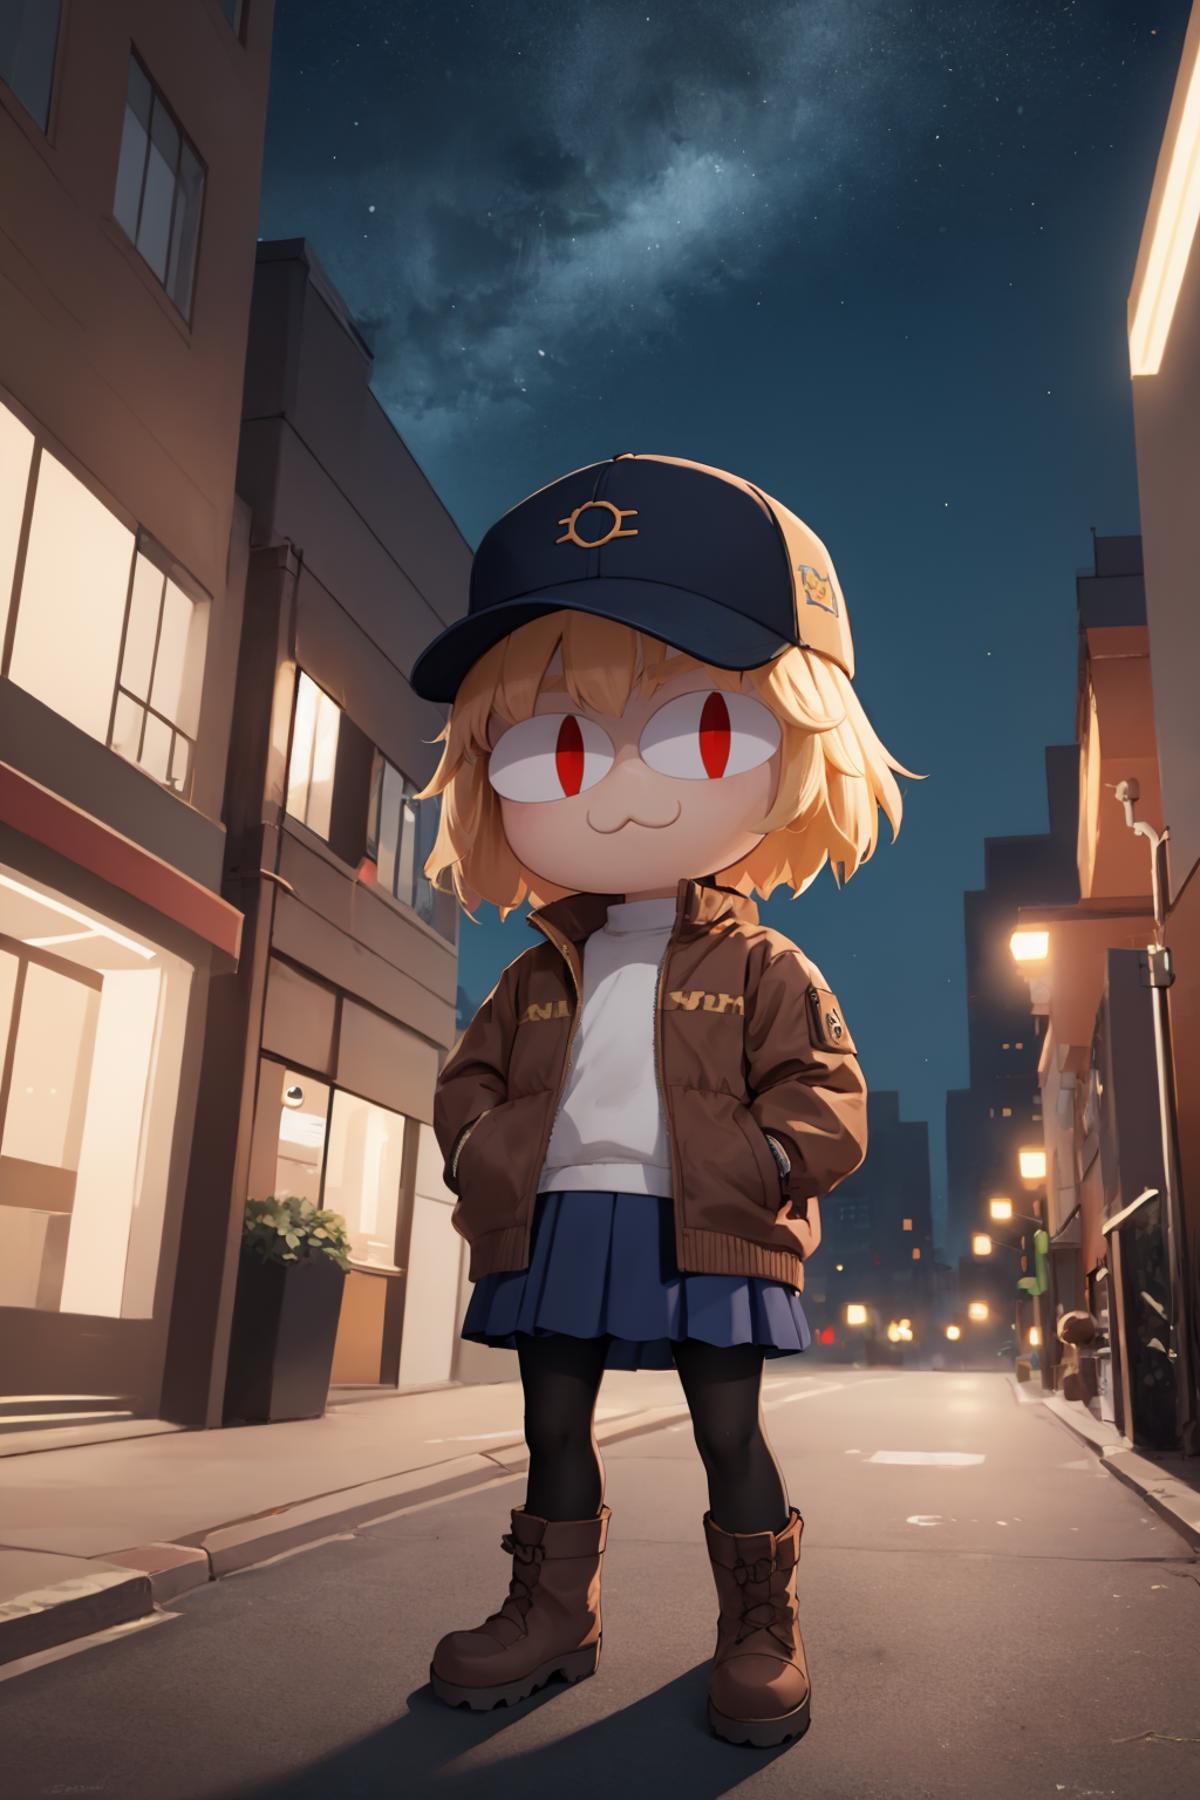 Anime character in a brown jacket and hat, standing on a street at night.